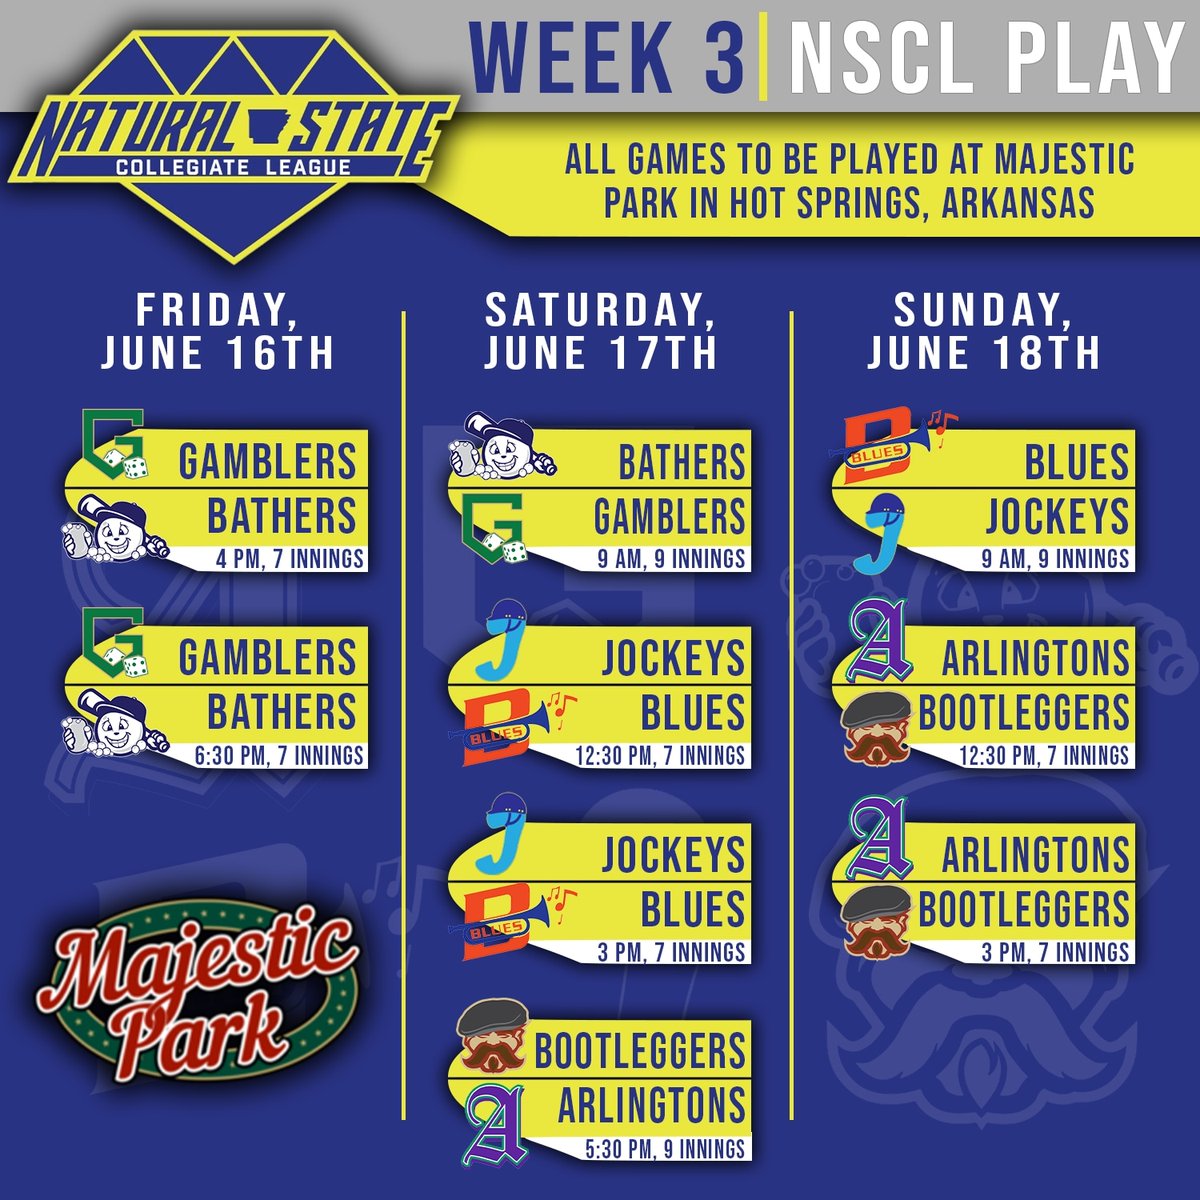 It's gameday at @MajesticParkHS! Week 3 begins at 4pm today and continues all weekend. #TheNatural